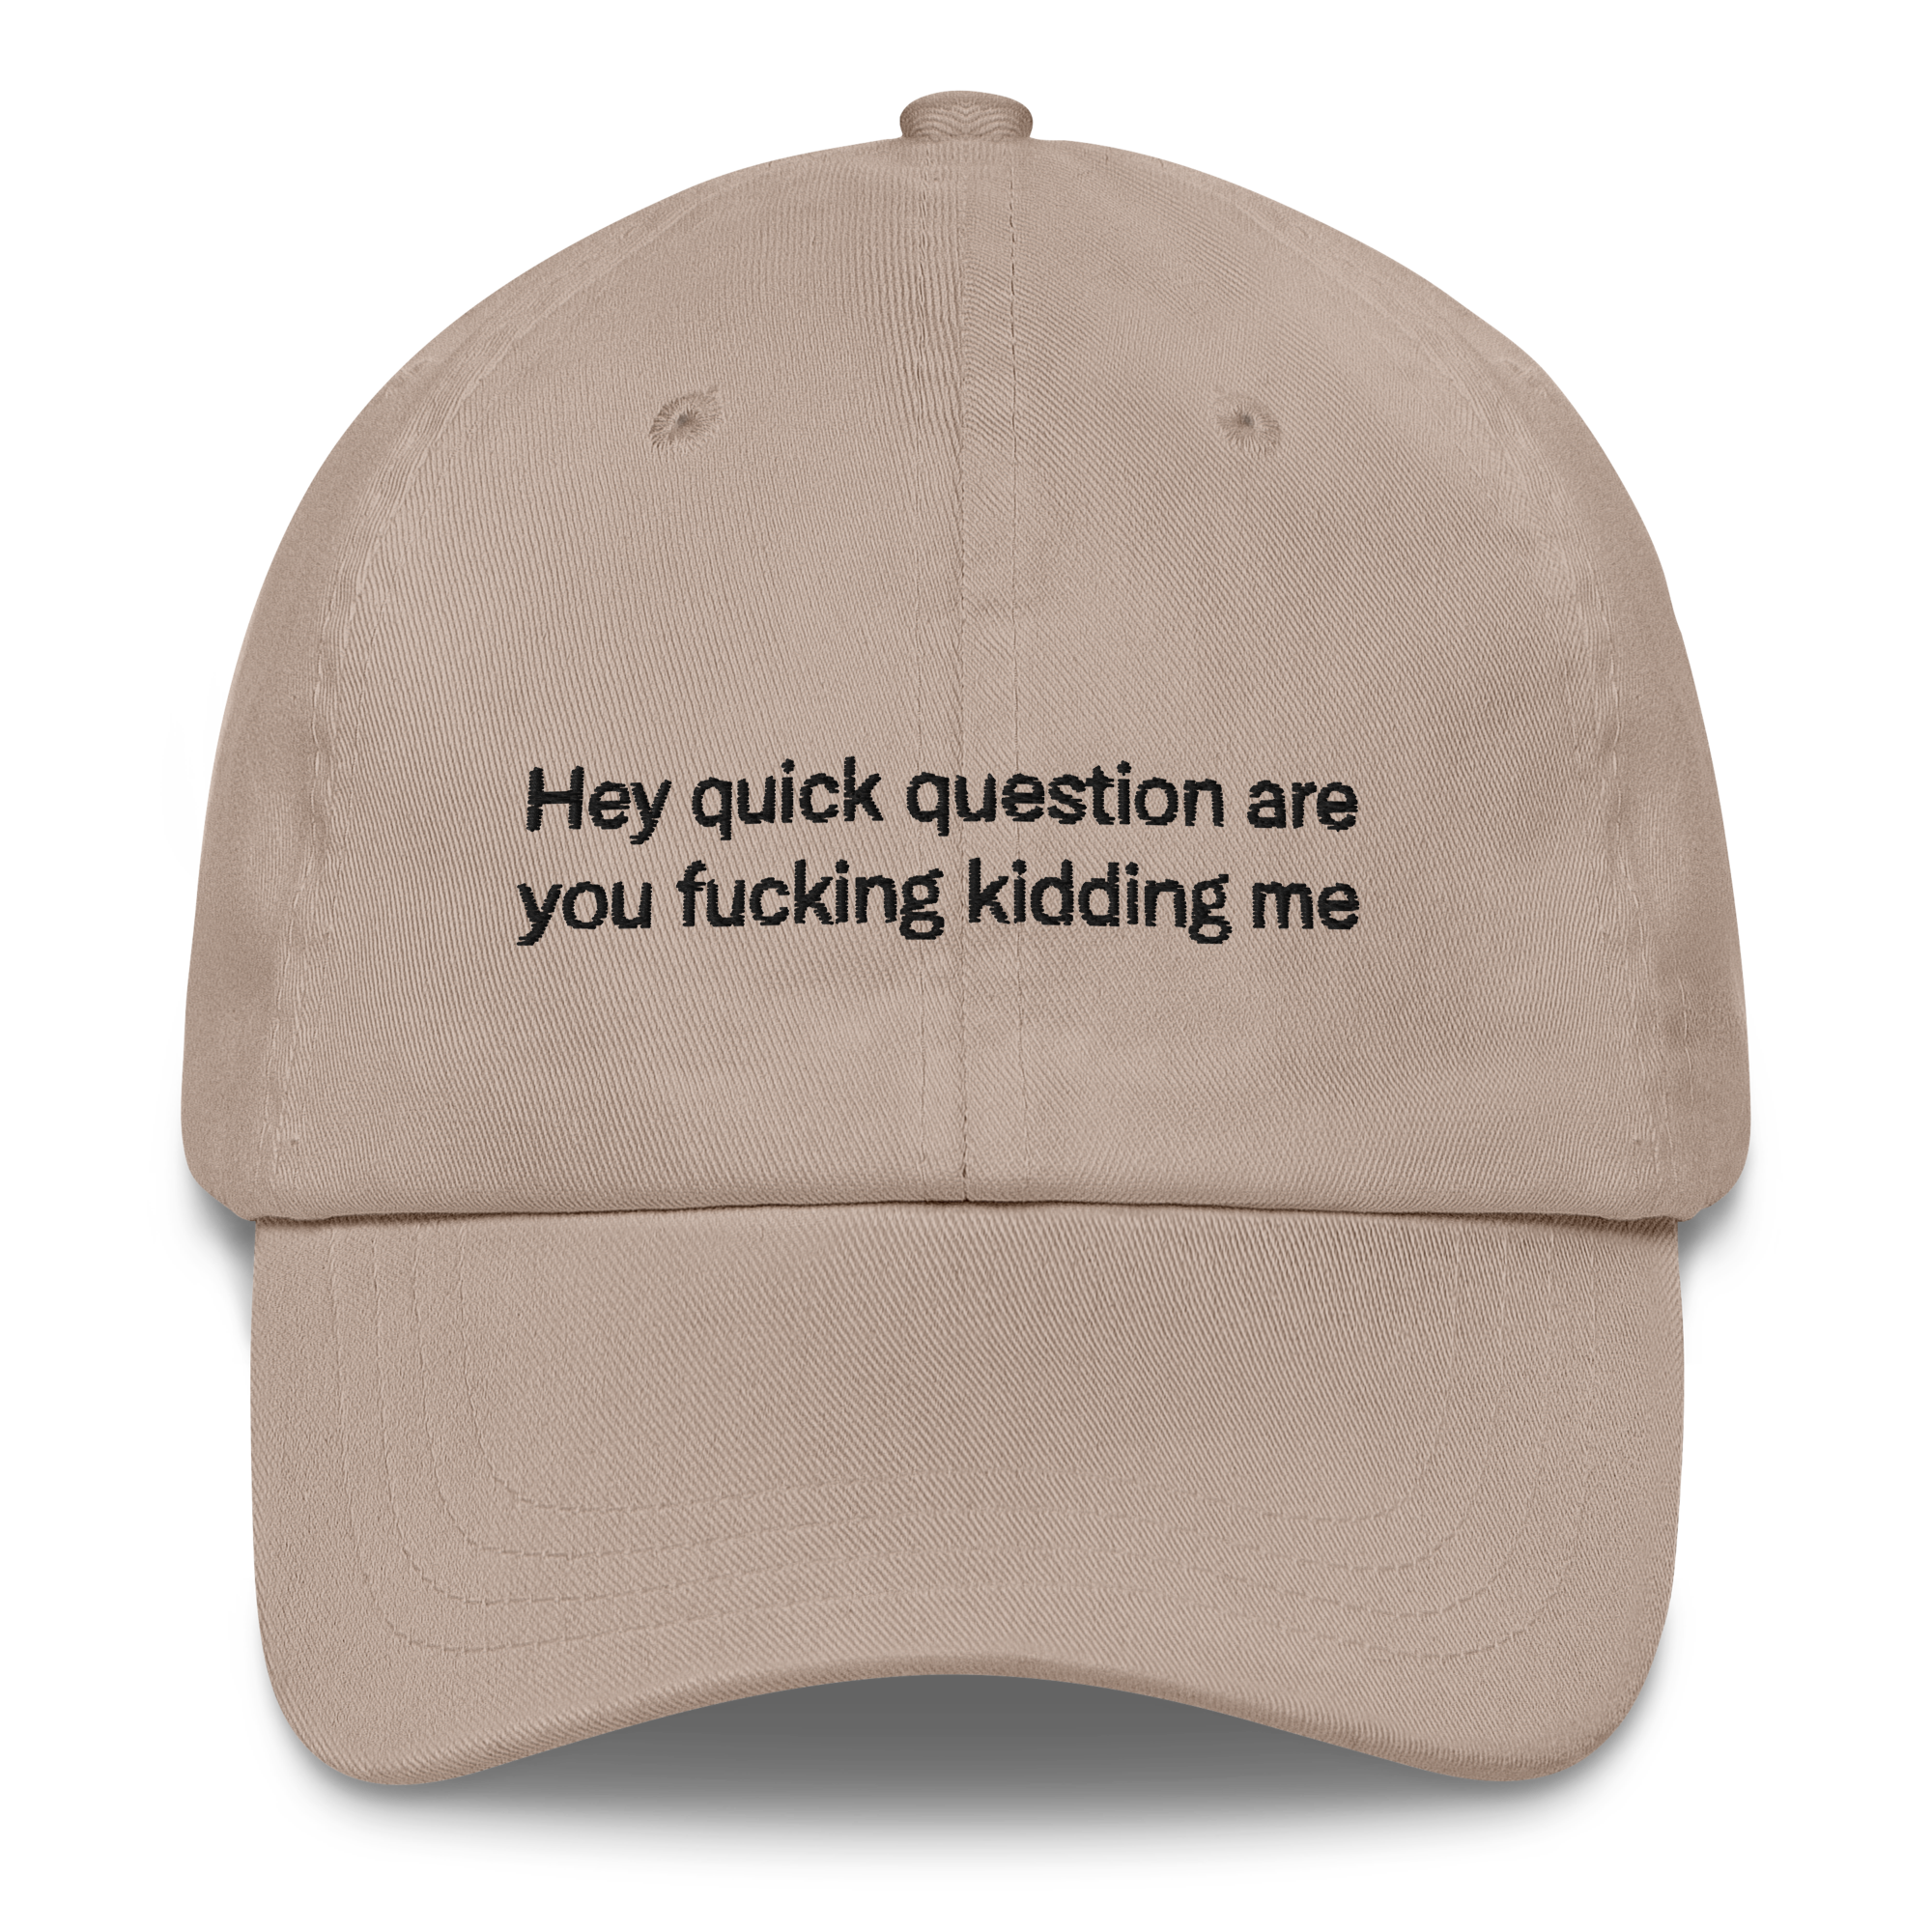 classic-dad-hat-stone-front-6679e411ab43a.png